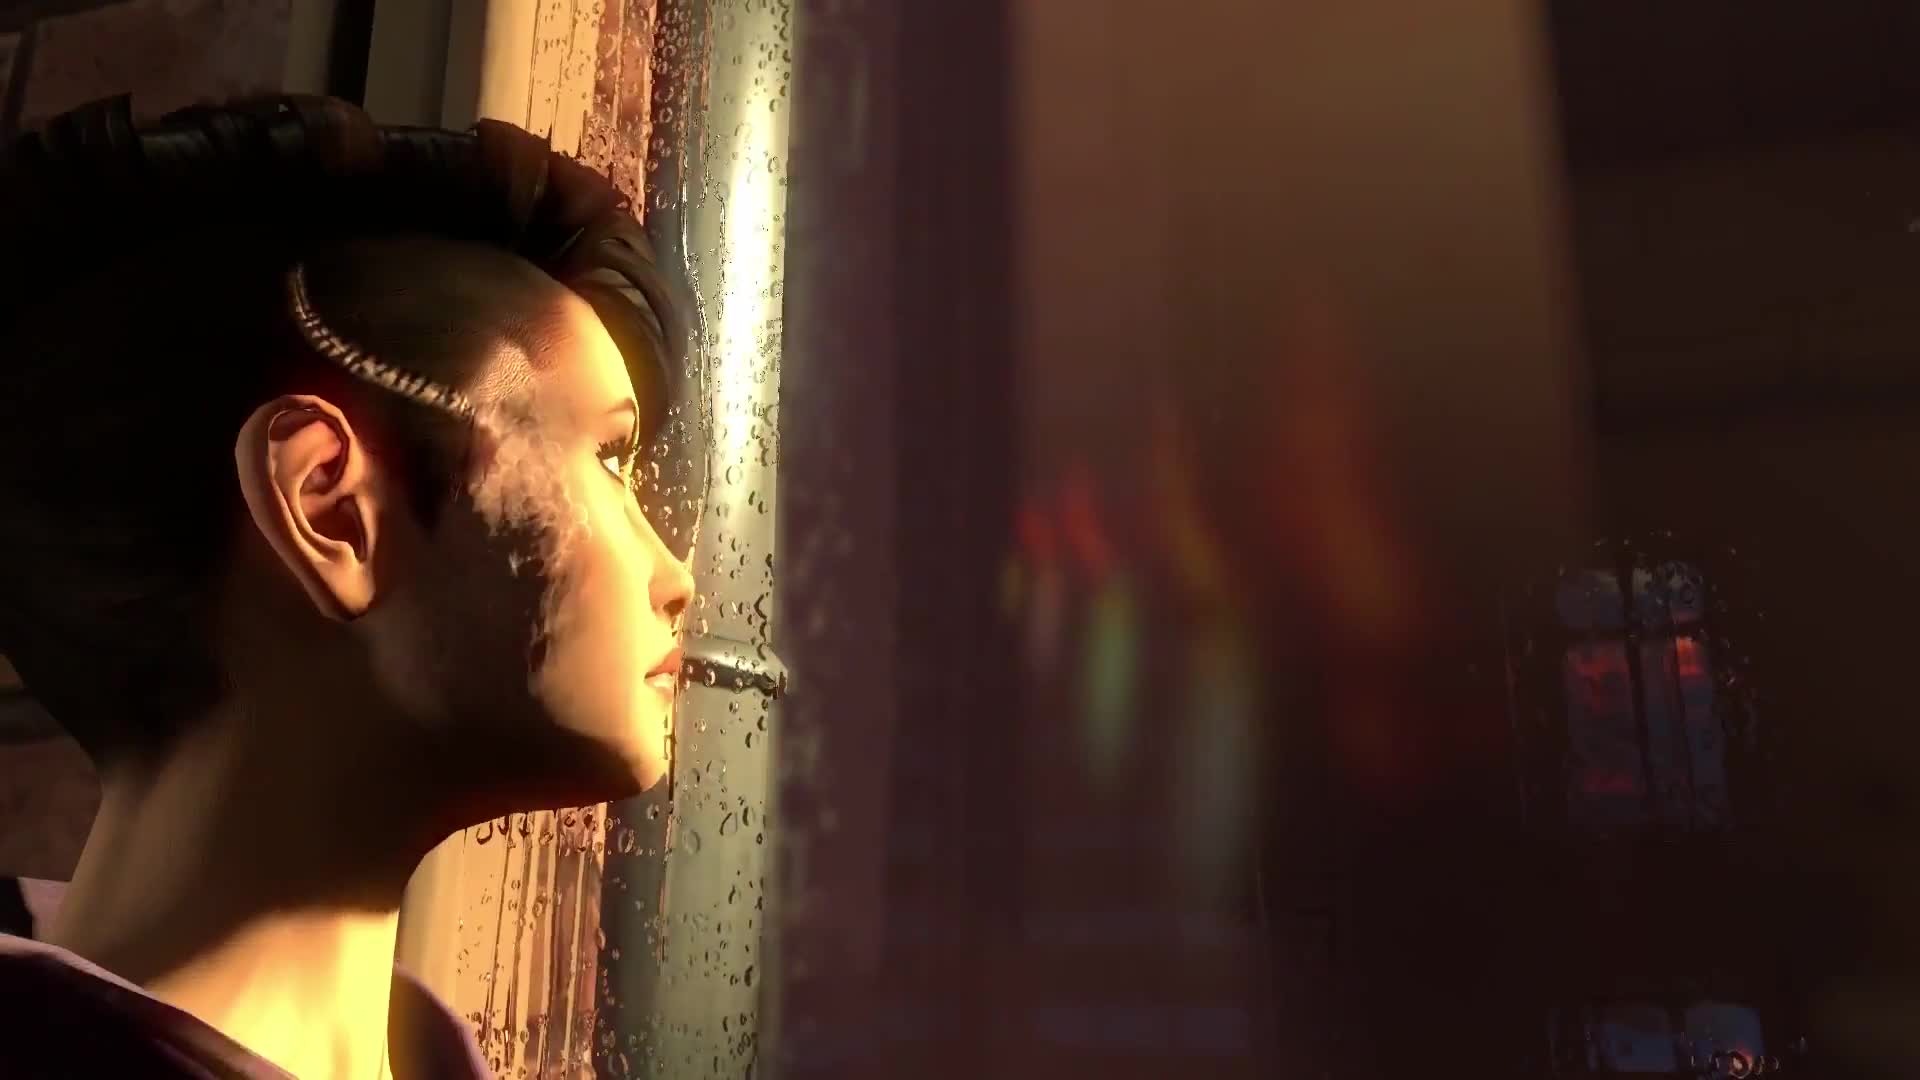 Dreamfall Chapters - Book 3 trailer